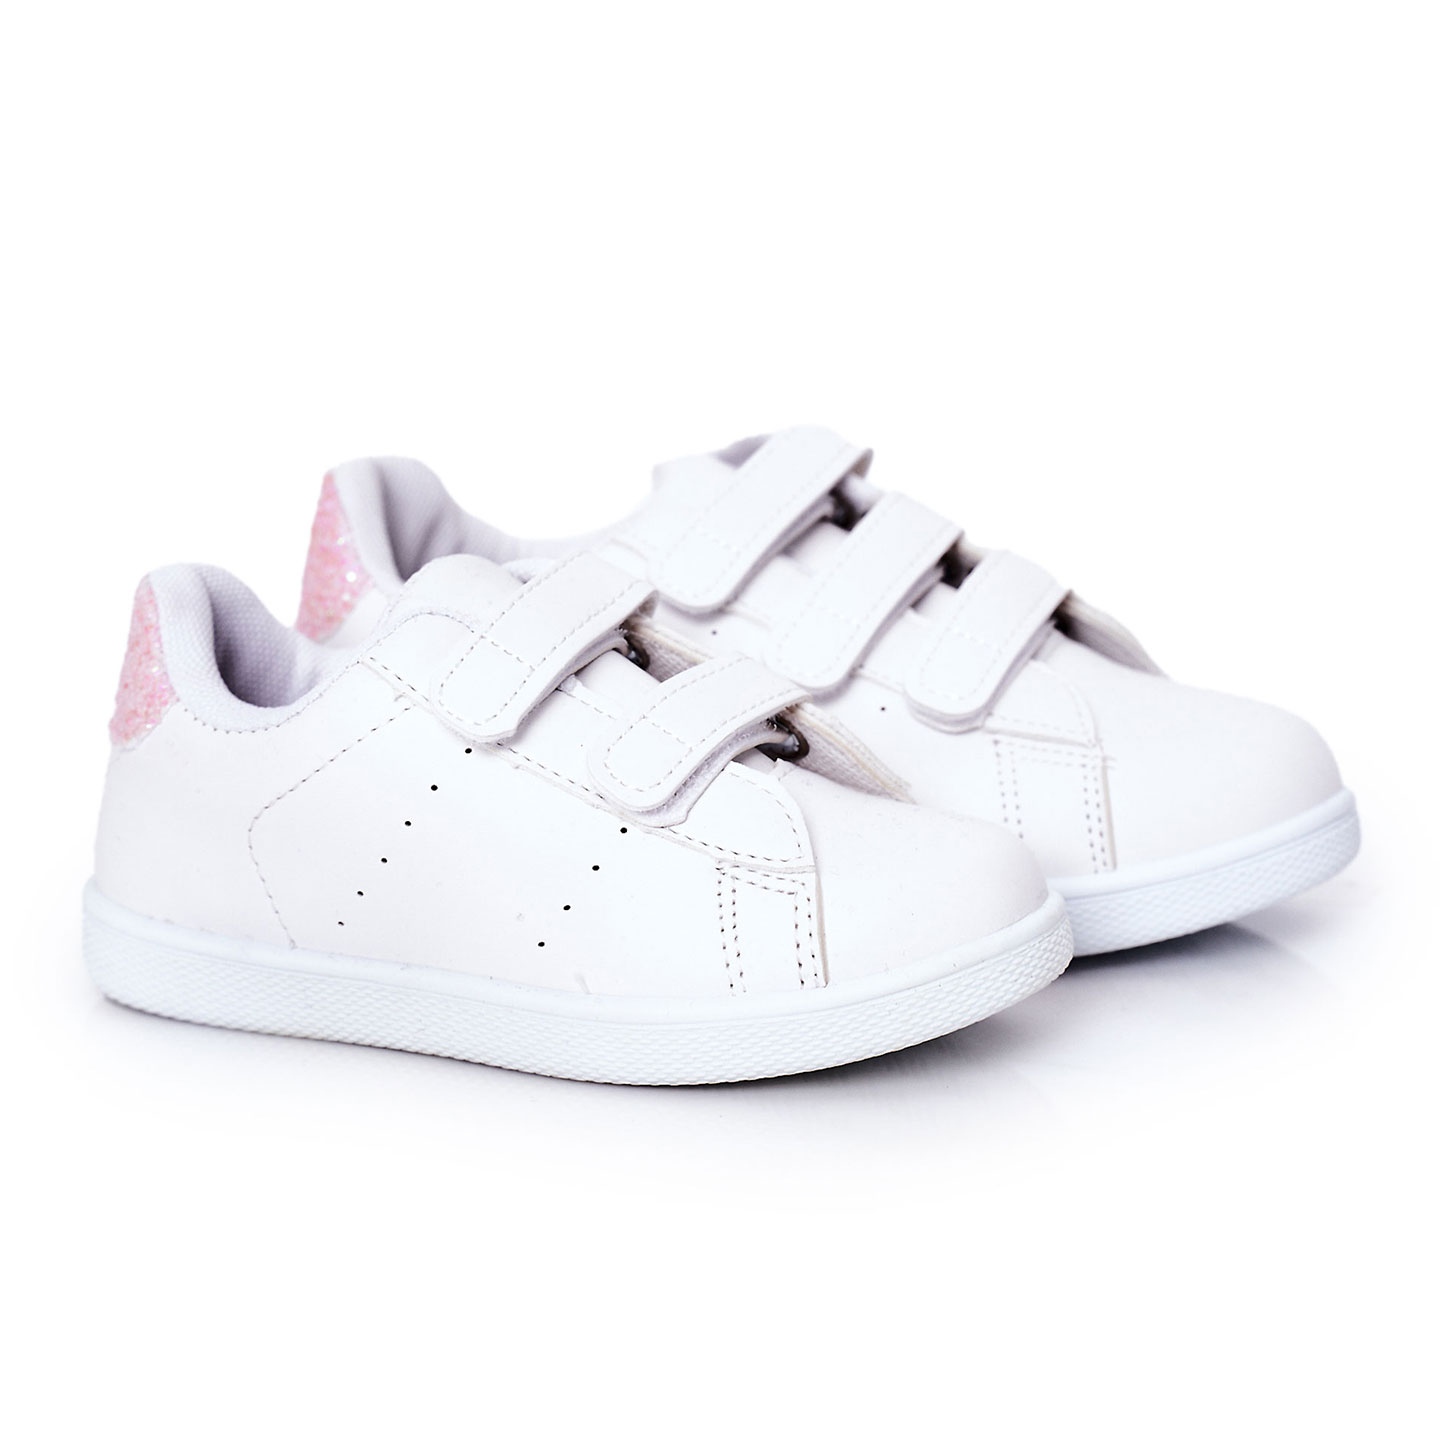 hvile enhed Forud type BM Children's Sneakers With Velcro White and Pink Cute Girl - KeeShoes